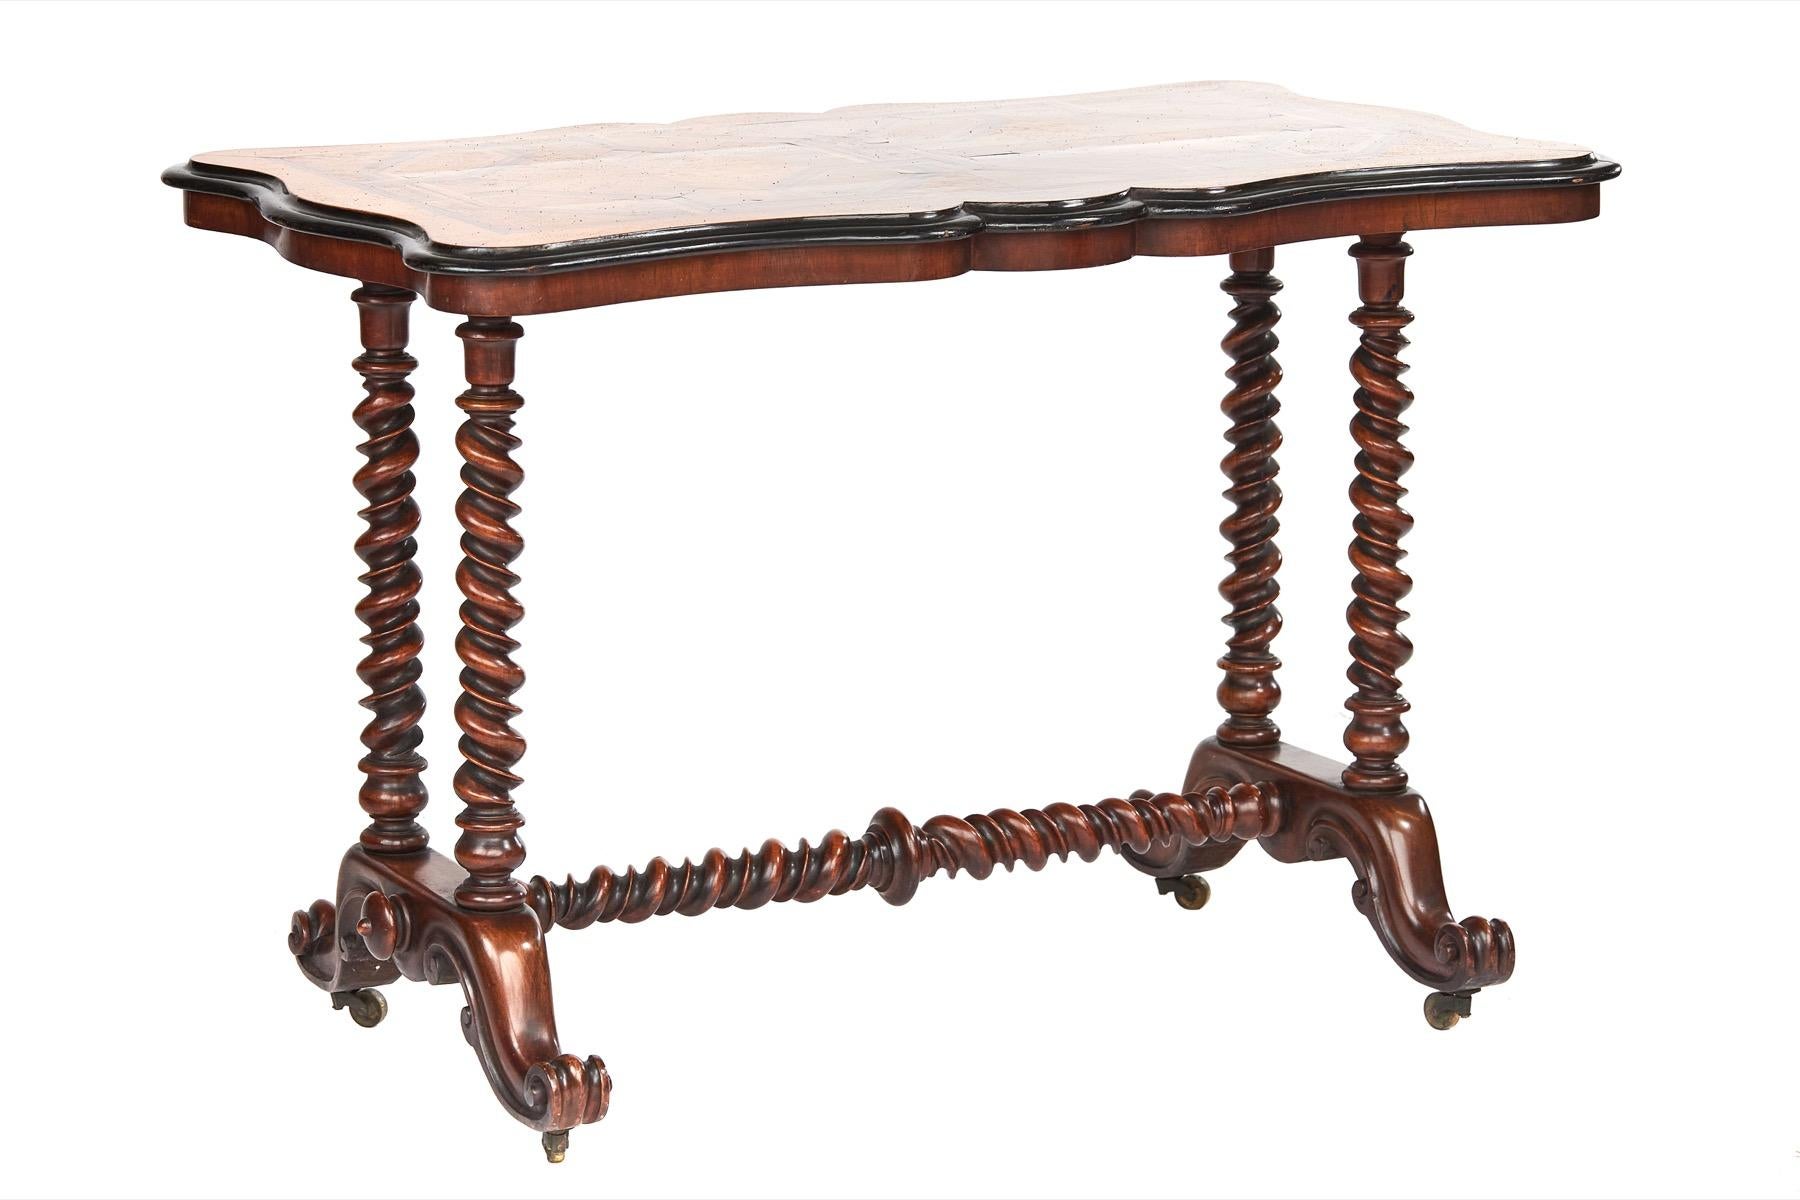 Victorian Mahogany & Oak Parquetry inlaid Centre Table,
Oak Parquety top with : Kingwood. Satinwood, Rosewood, & Boxwood inlay,
Ebonised shaped thumb mould edge, 
Mahogany Base with 4 Barley twist supports, & Cross Stetcher, 
4 Carved Cabriole